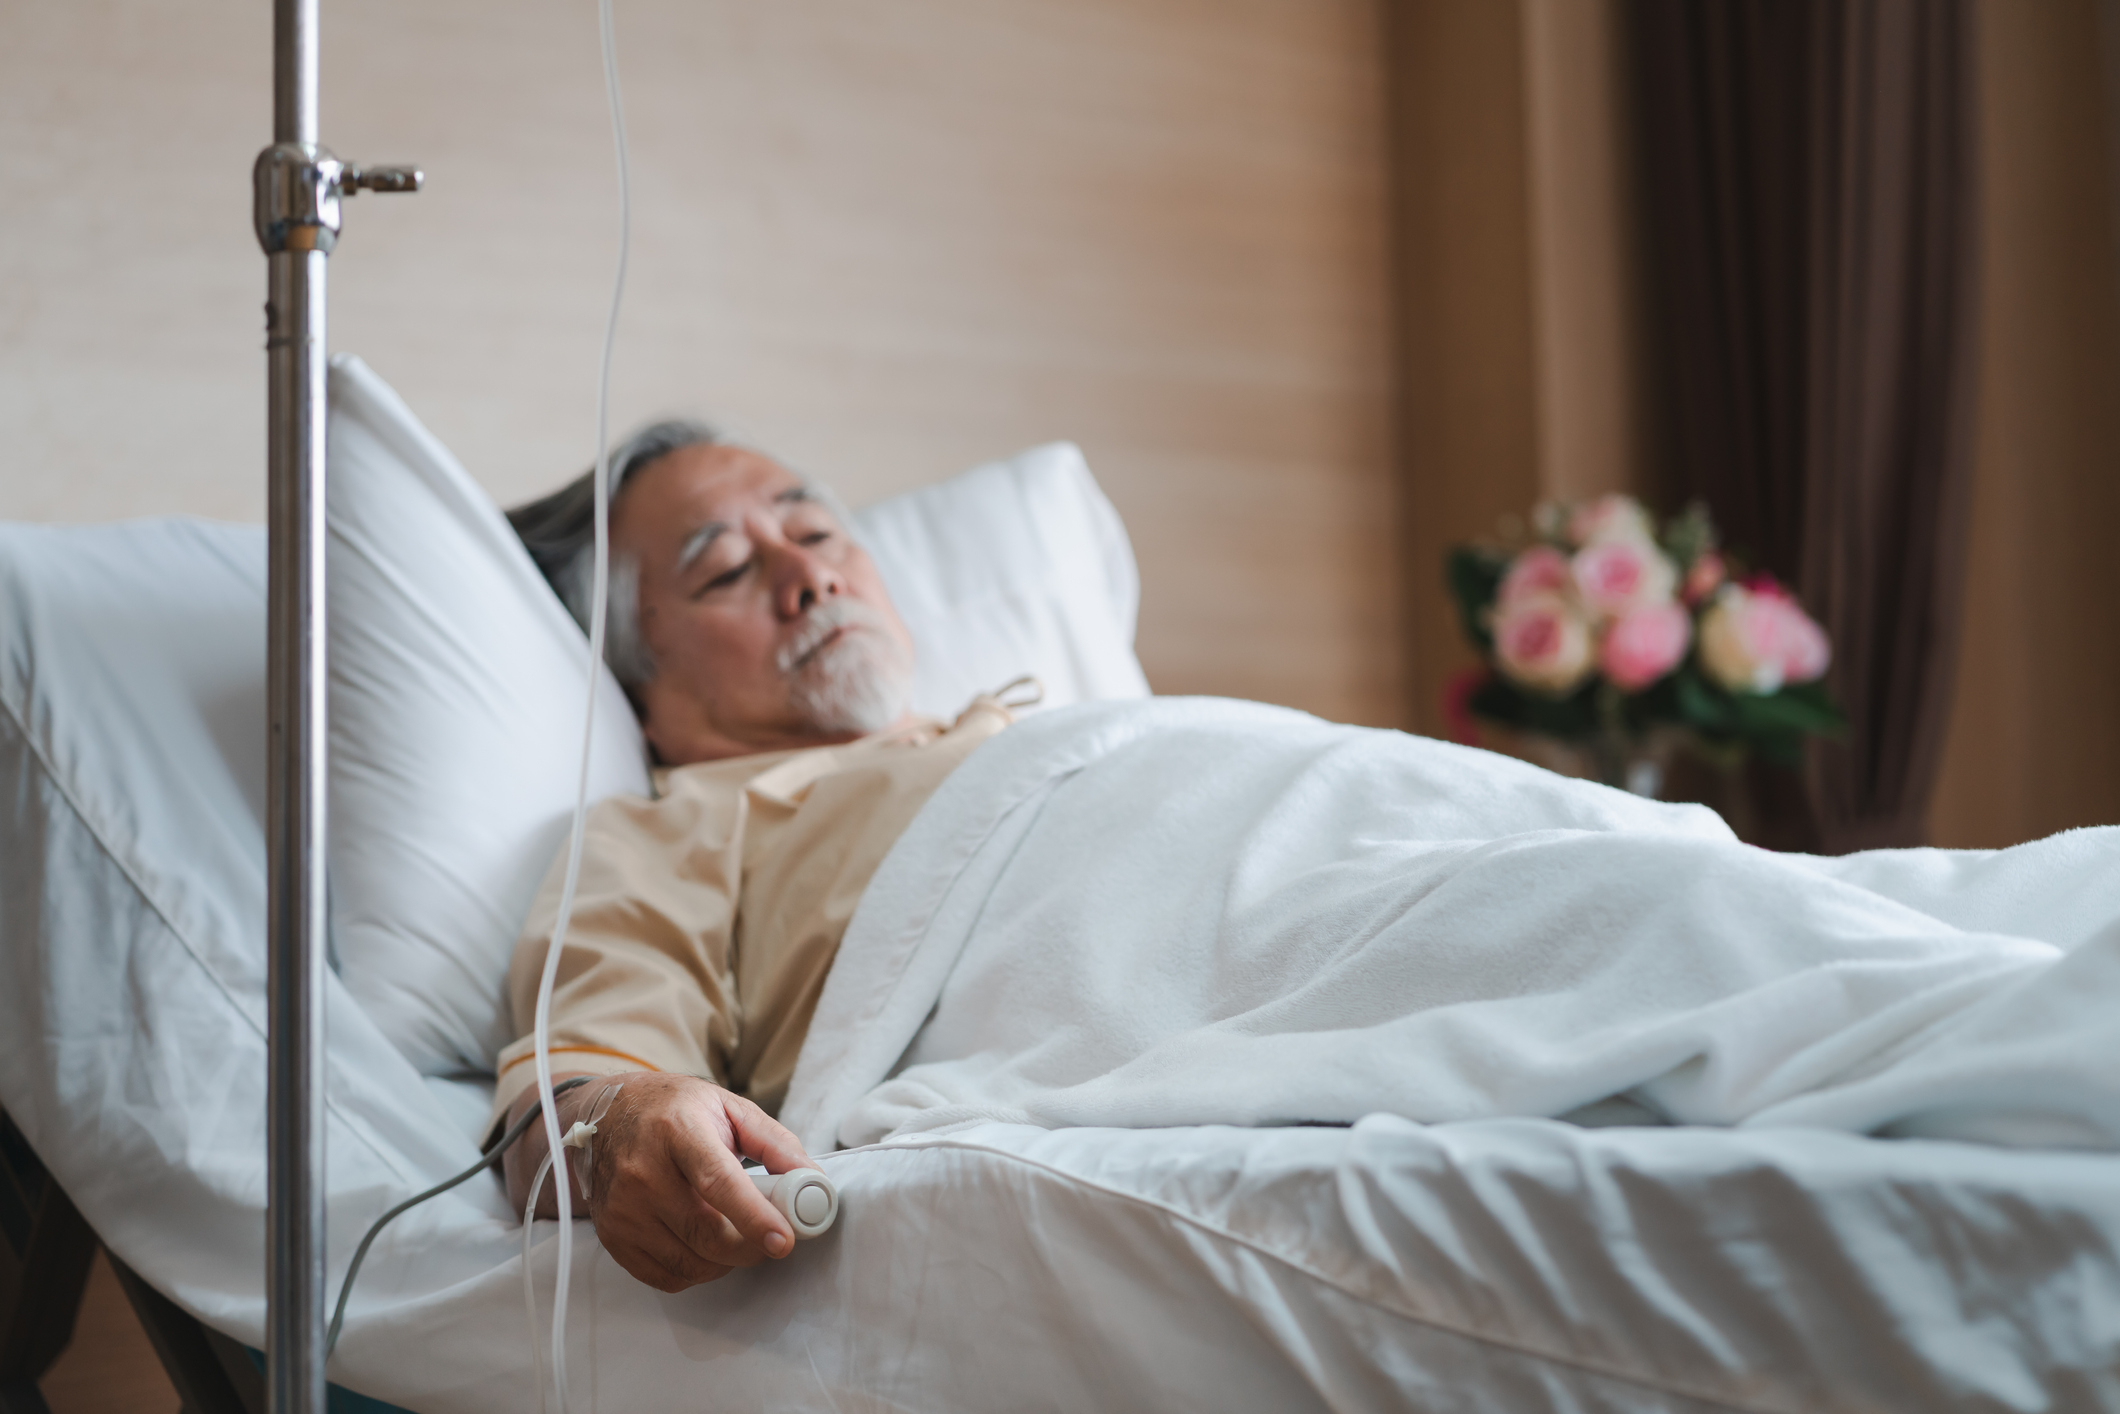 A man lying in a hospital bed